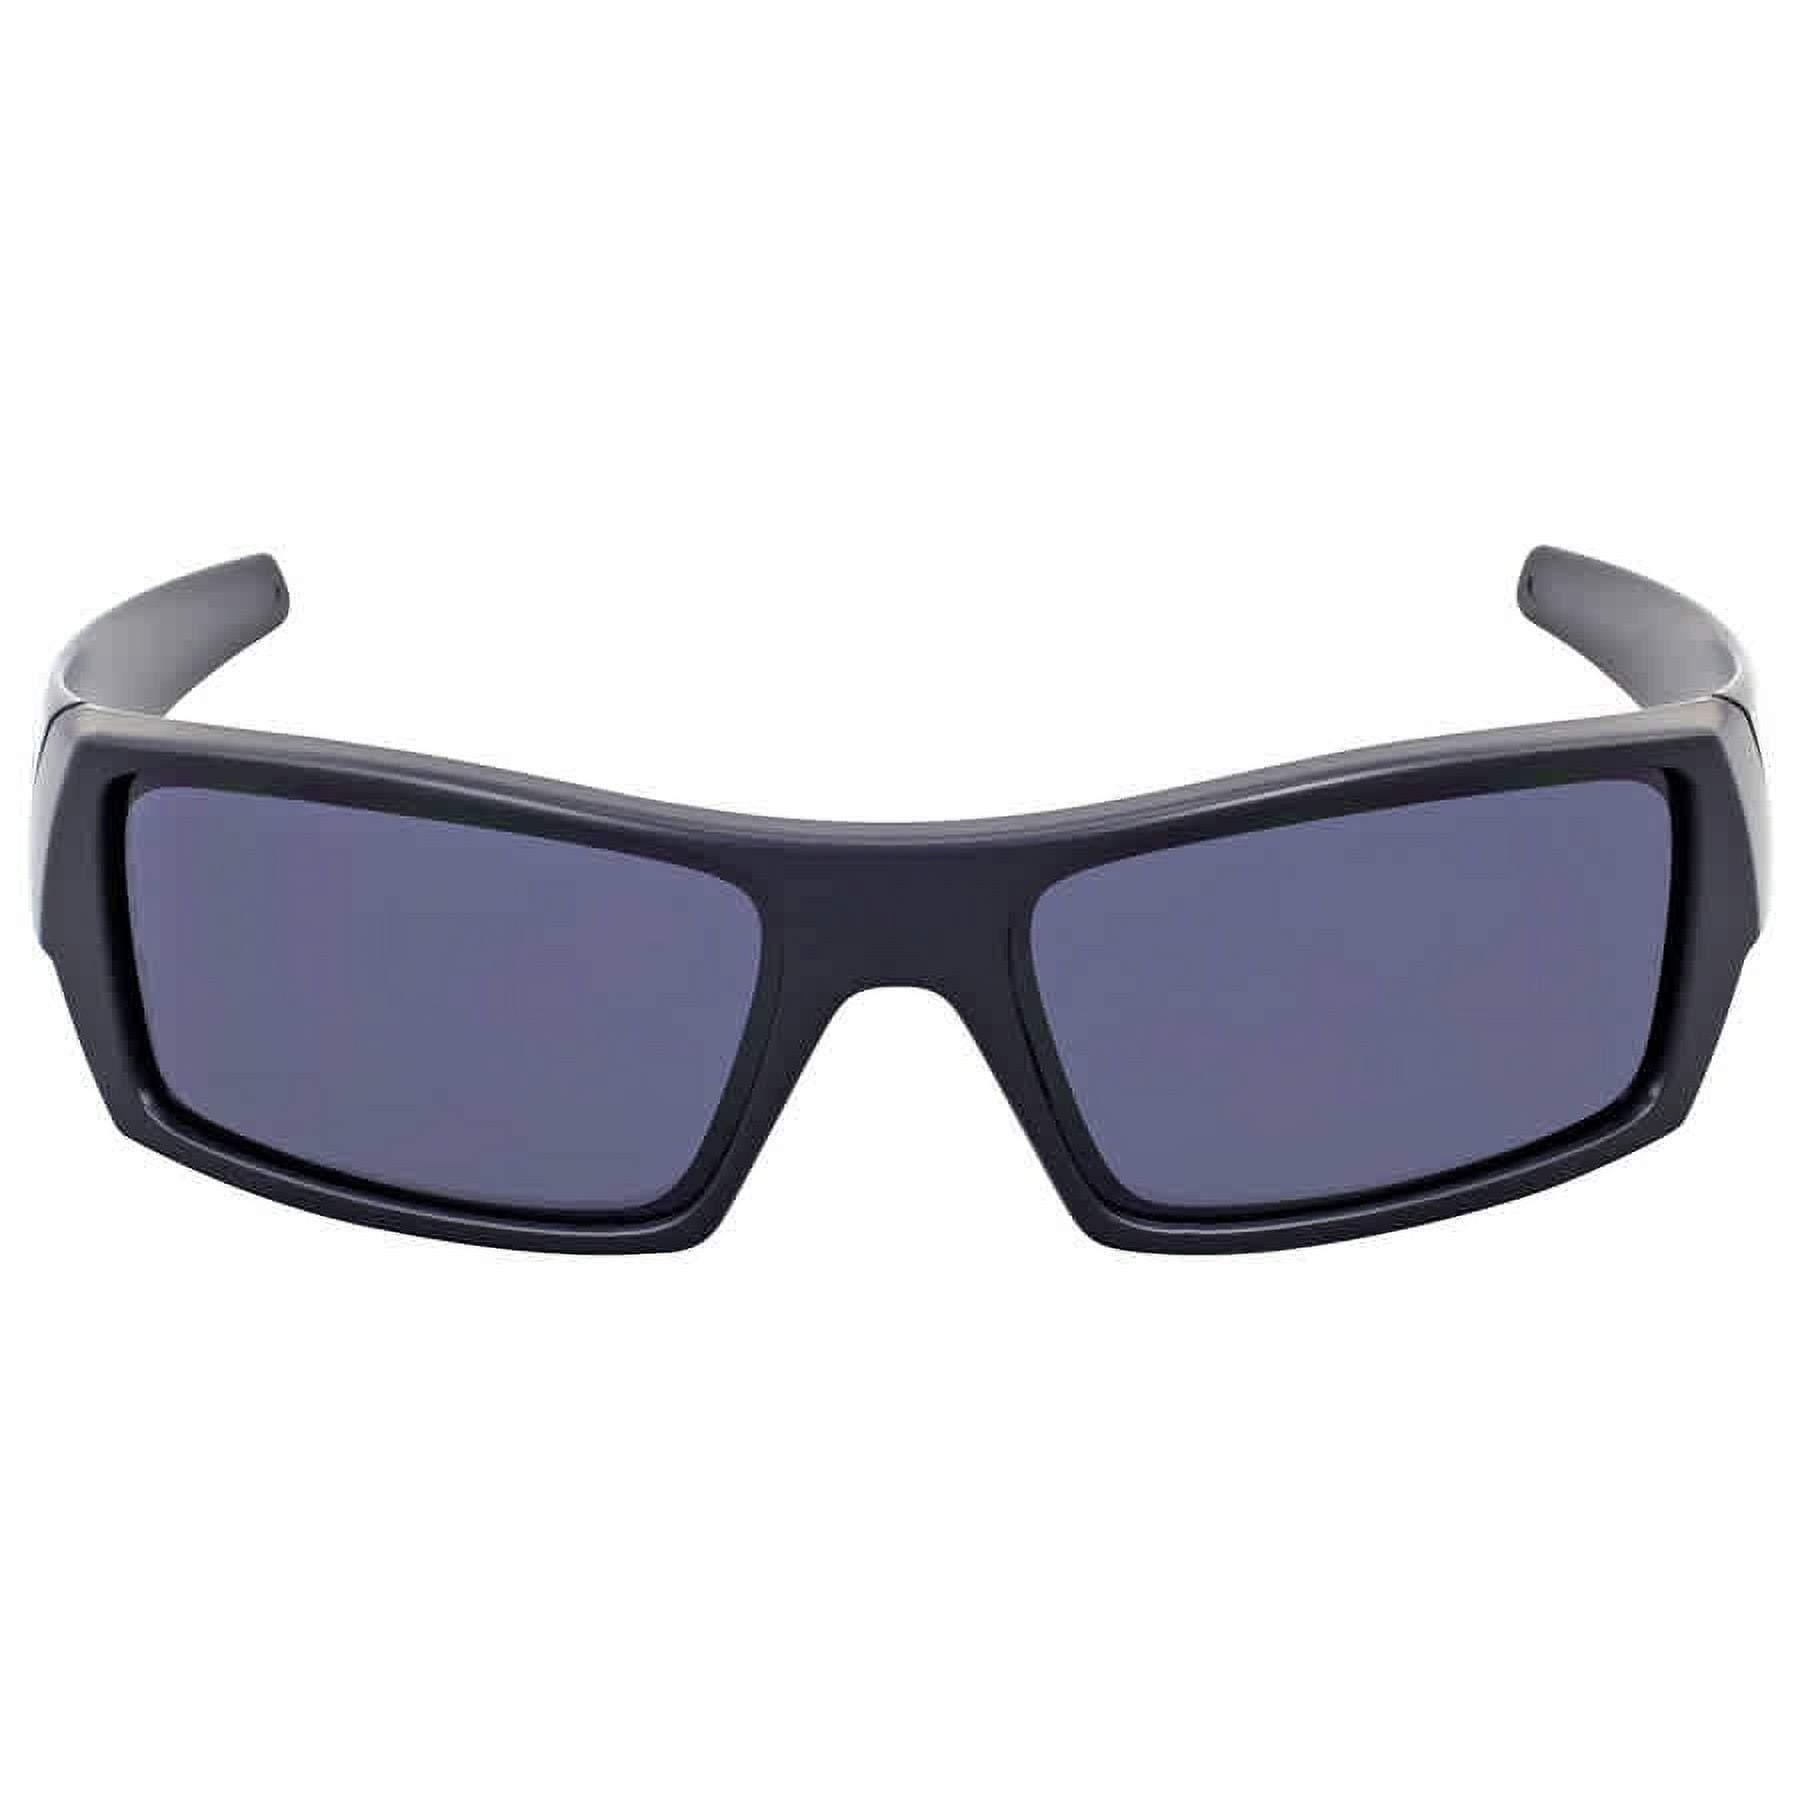 Oakley Vault, 3965 Eagan Outlets Pkwy Eagan, MN  Men's and Women's  Sunglasses, Goggles, & Apparel